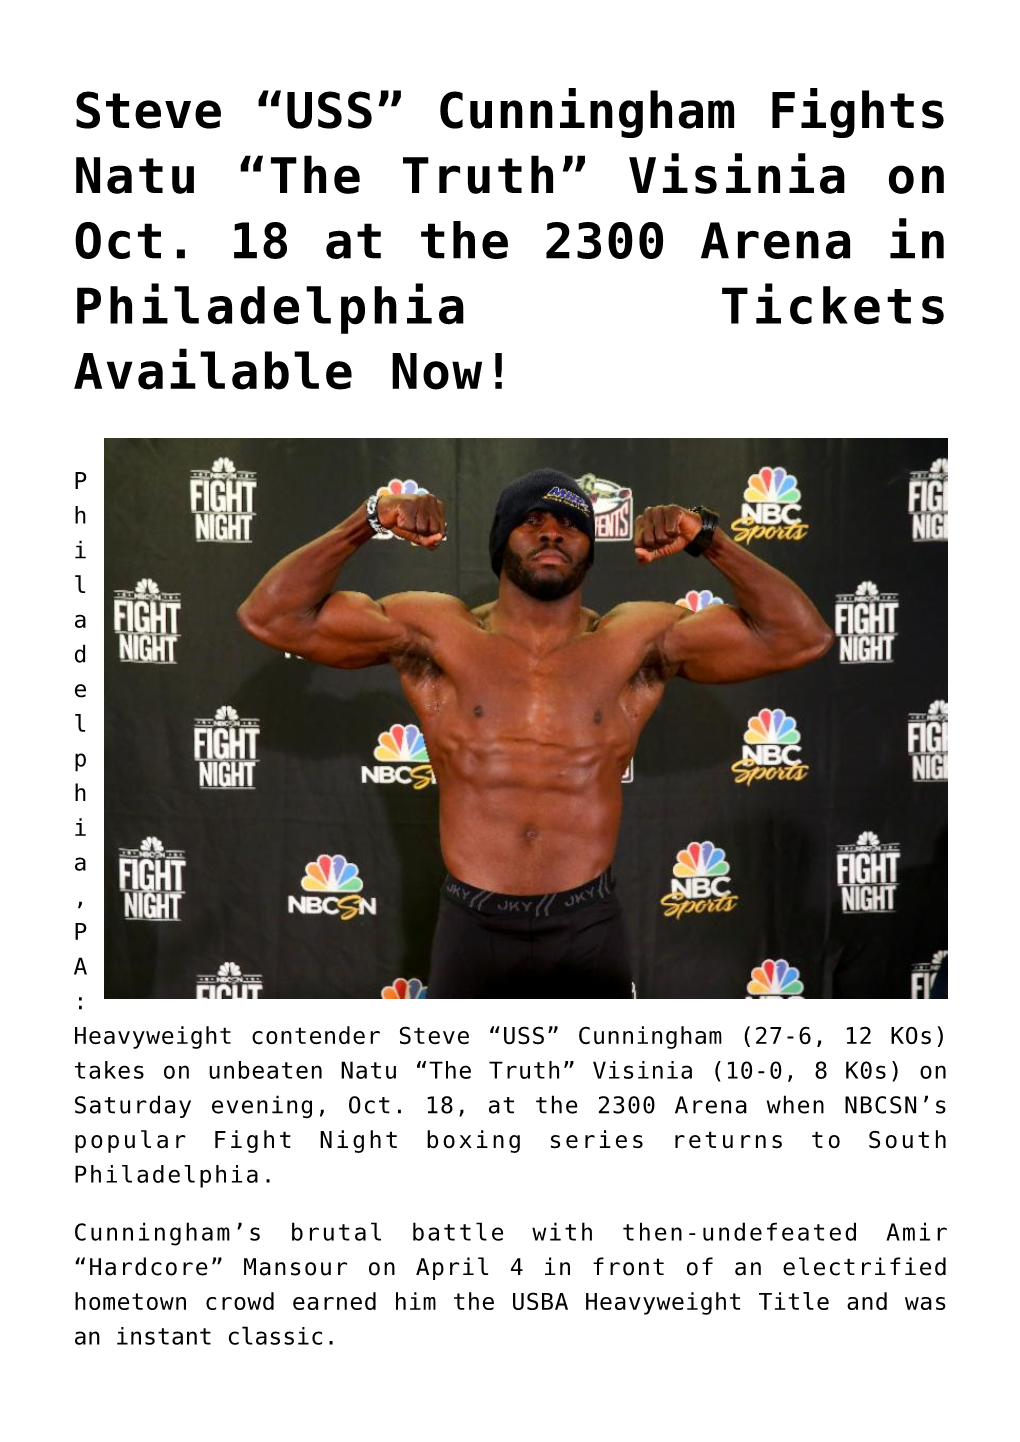 Visinia on Oct. 18 at the 2300 Arena in Philadelphia Tickets Available Now!